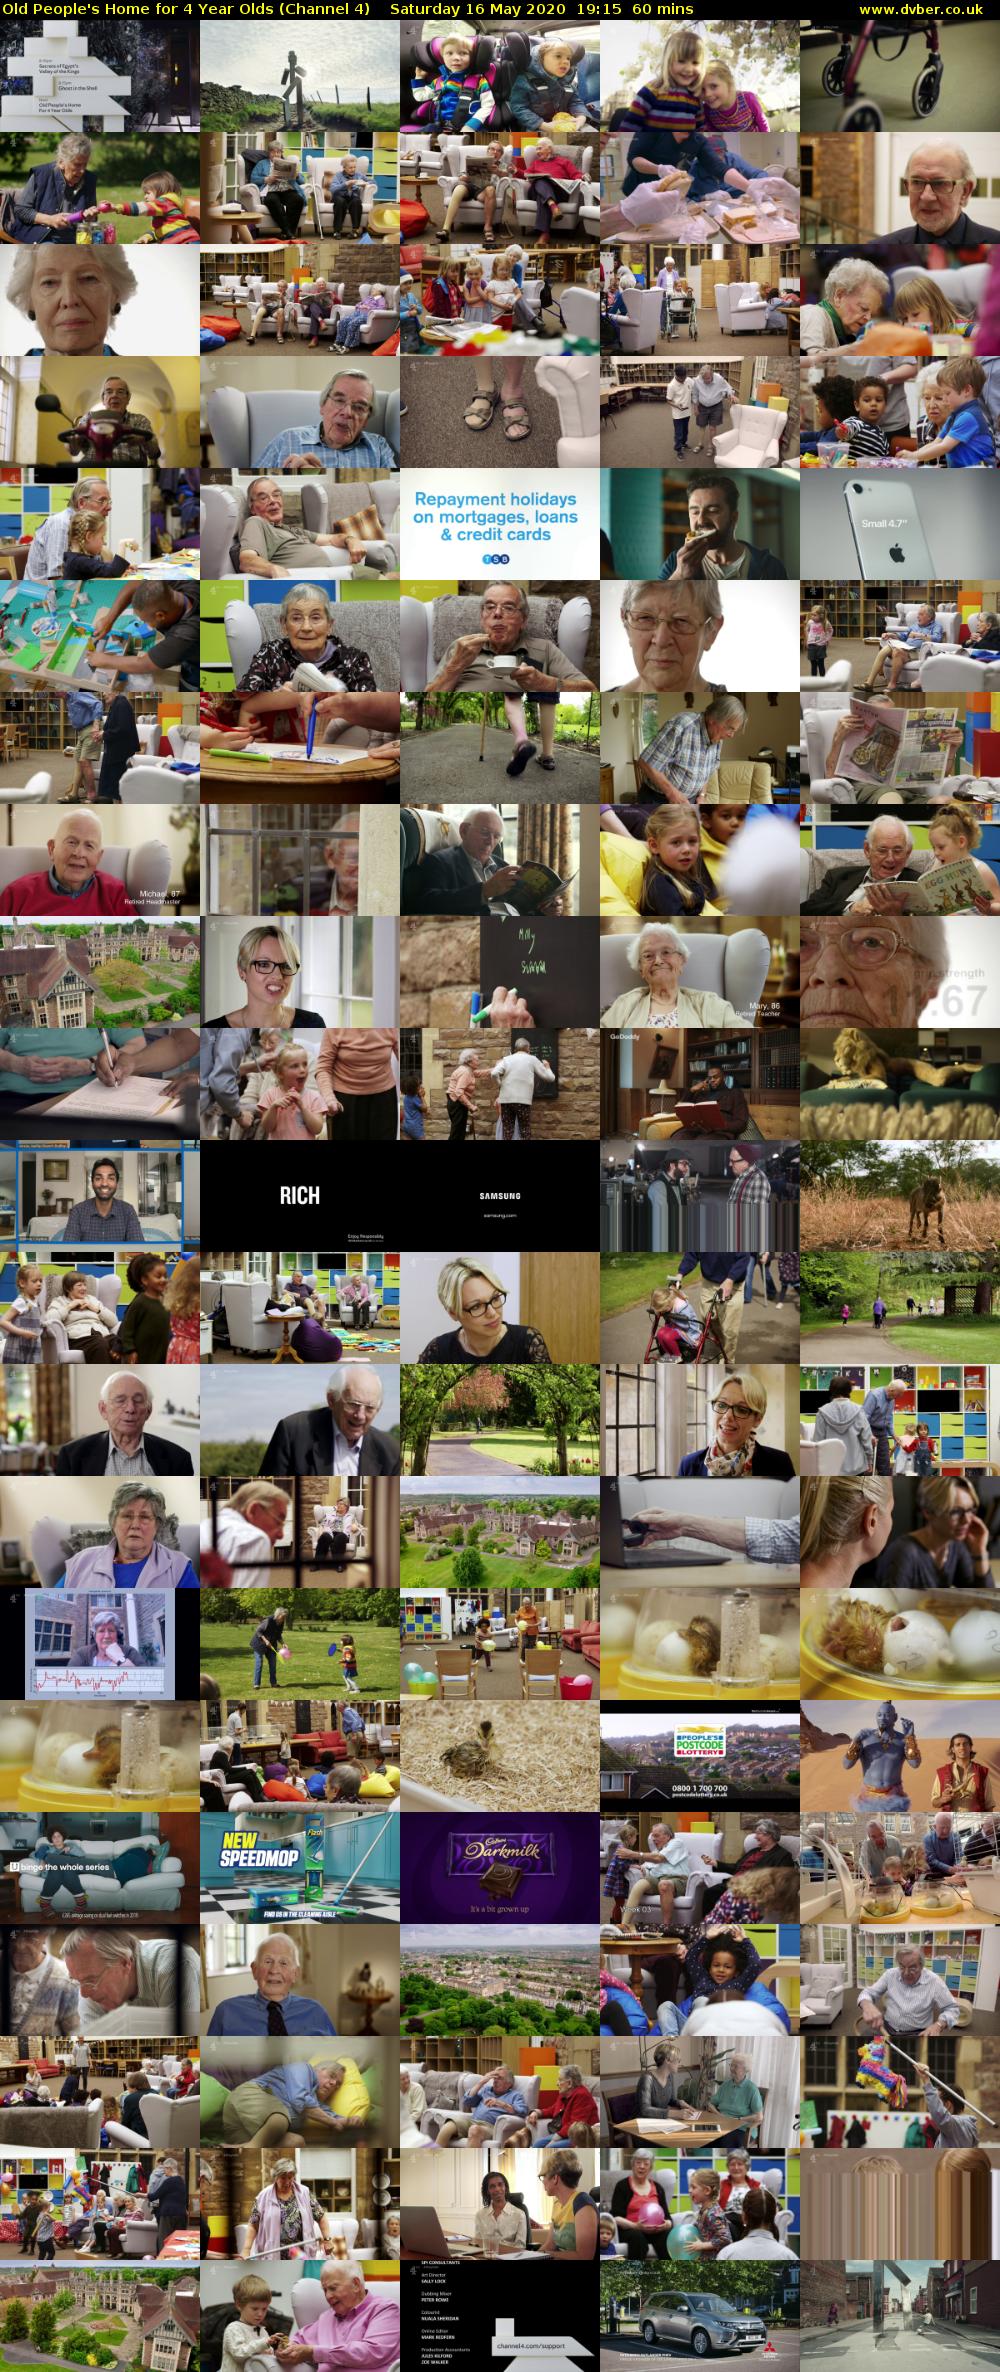 Old People's Home for 4 Year Olds (Channel 4) Saturday 16 May 2020 19:15 - 20:15